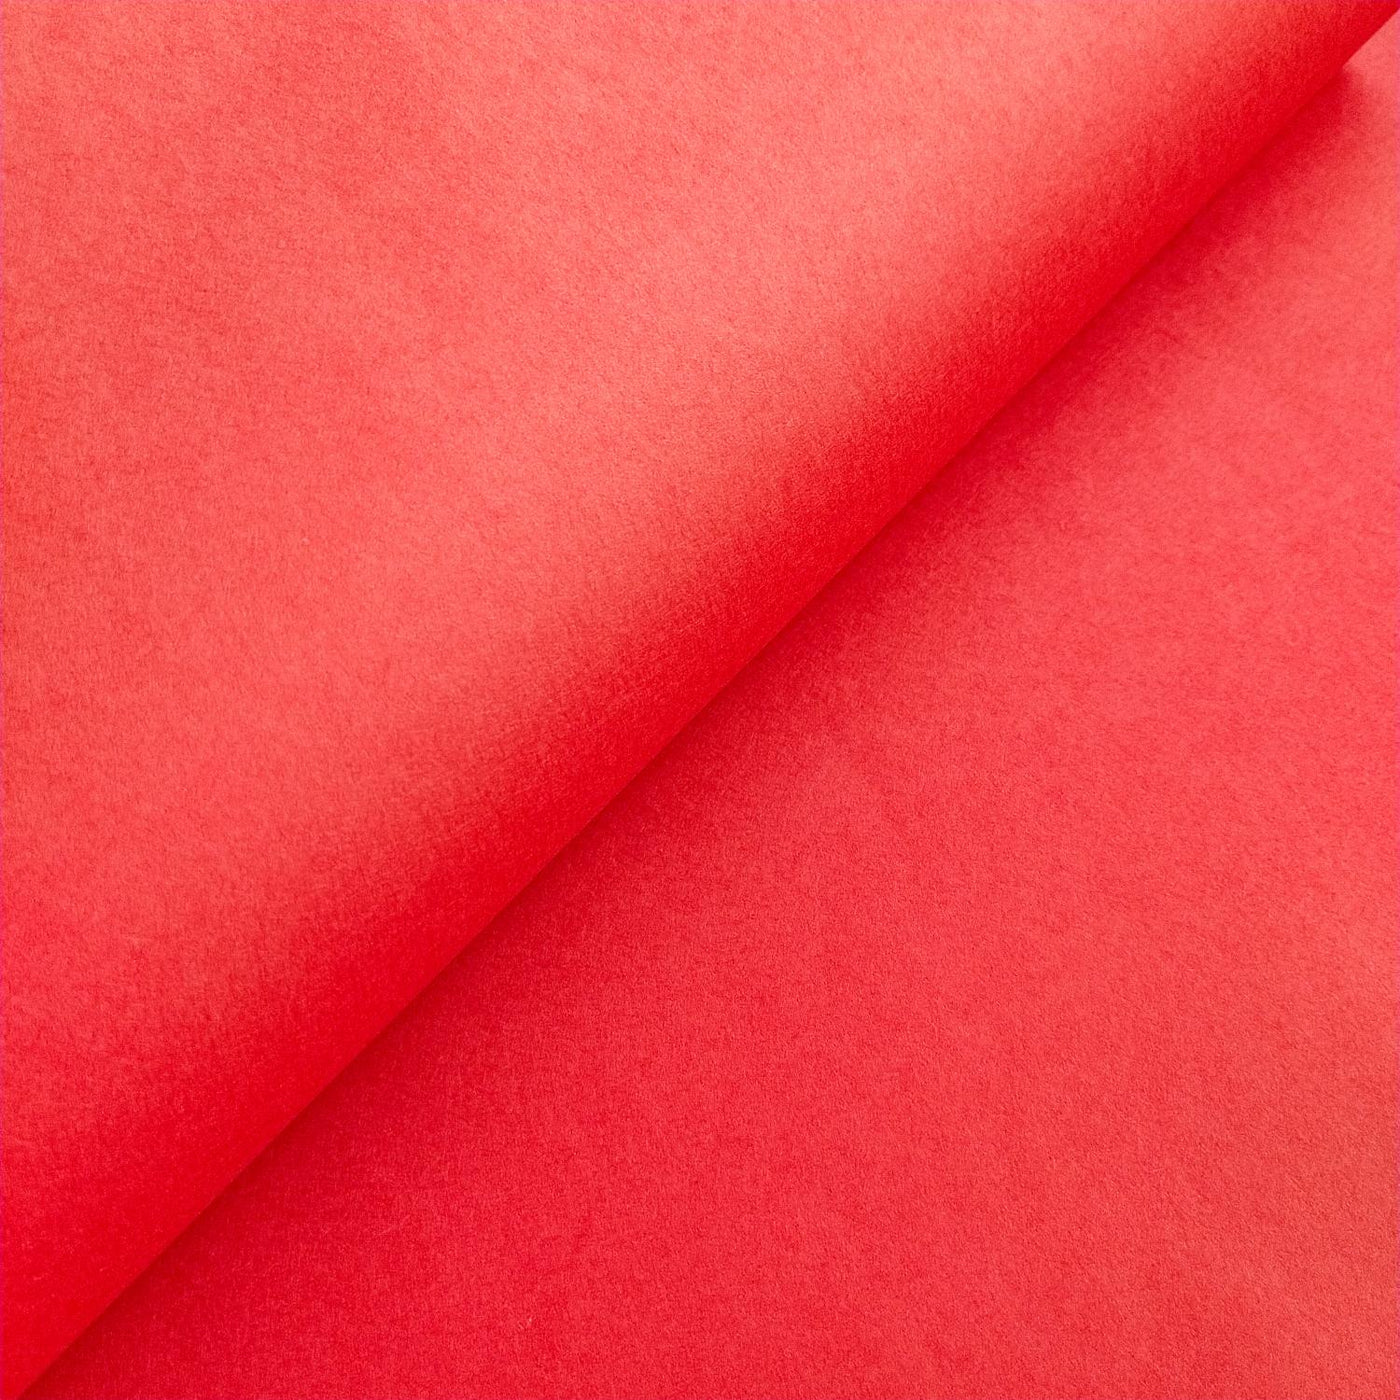 Solid-Colored Kozo Mulberry Paper (Cherry Red)